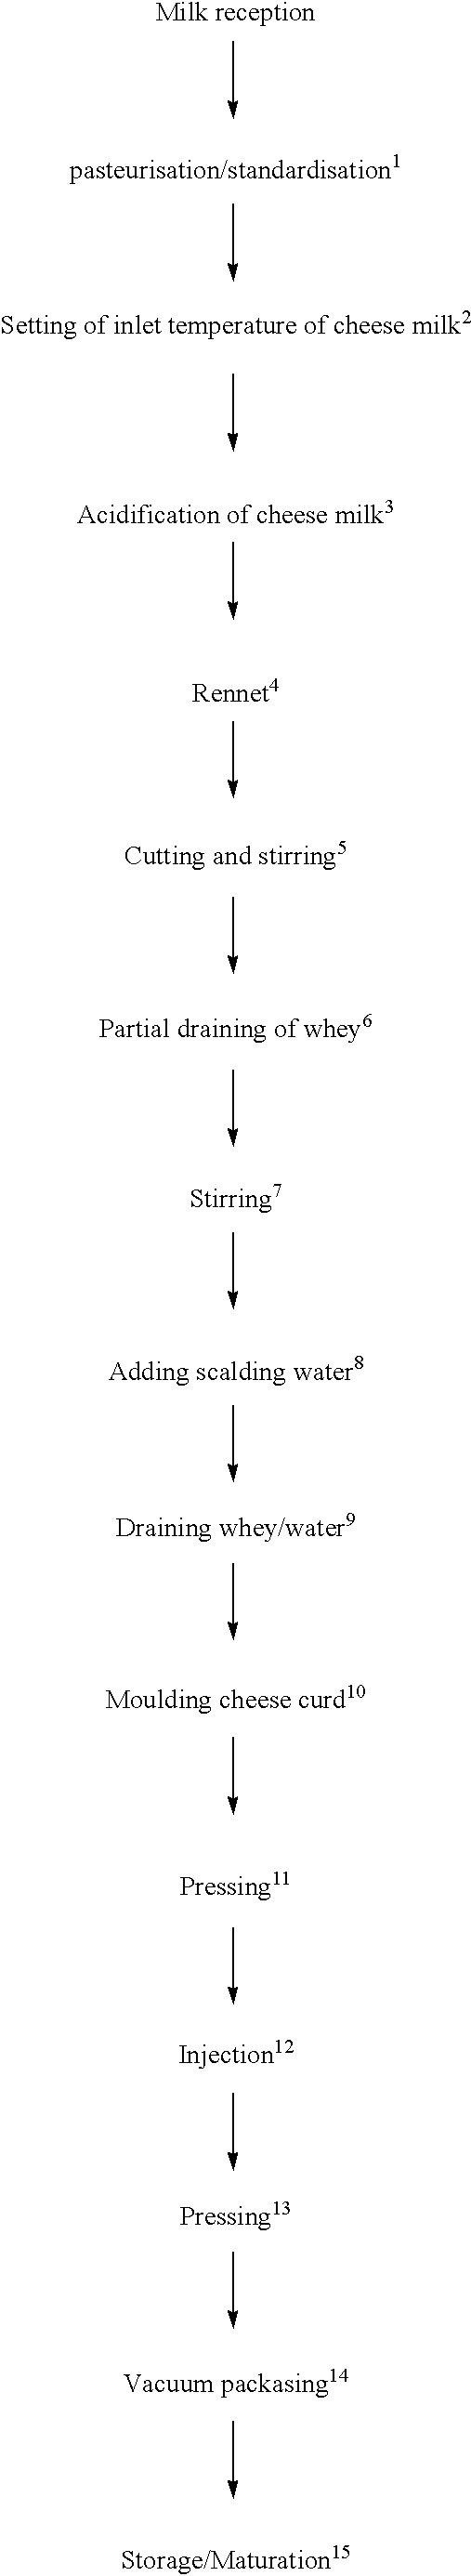 Method for providing a cheese by adding a lactic acid bacterial starter culture to the cheese curd